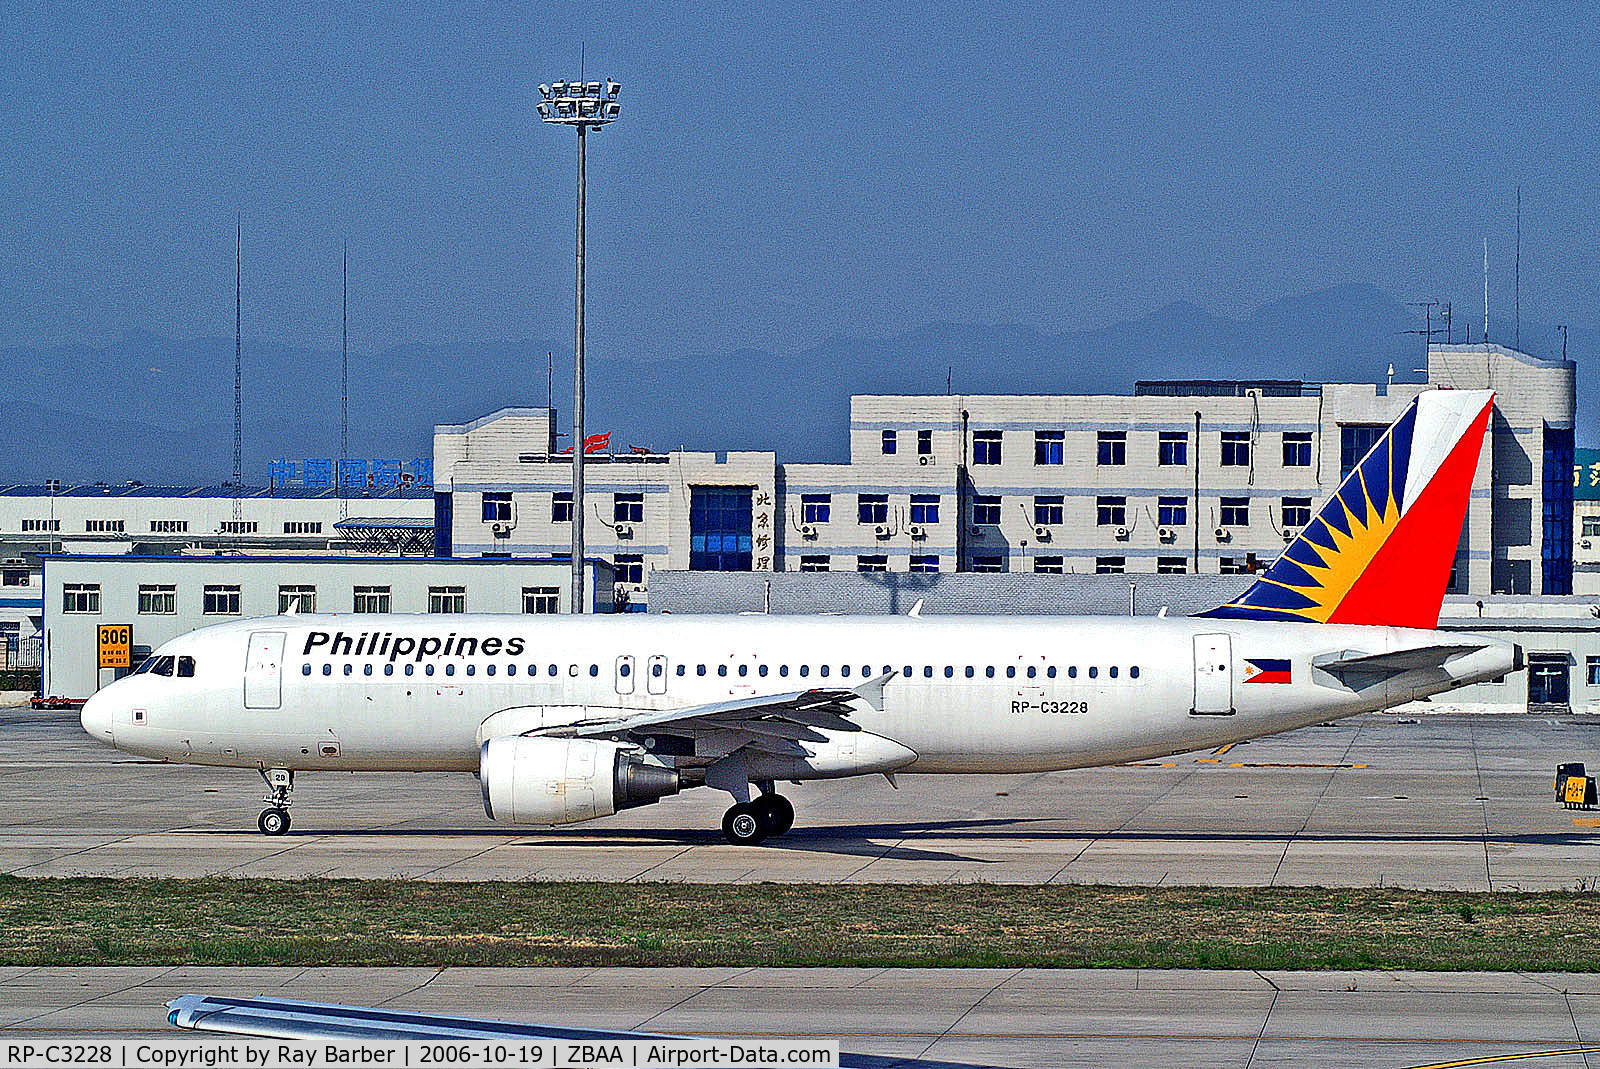 RP-C3228, 2004 Airbus A320-214 C/N 2162, RP-C3228   Airbus A320-214 [2182] (Philippines Airlines) Beijing Capital Int'l~B 19/10/2006